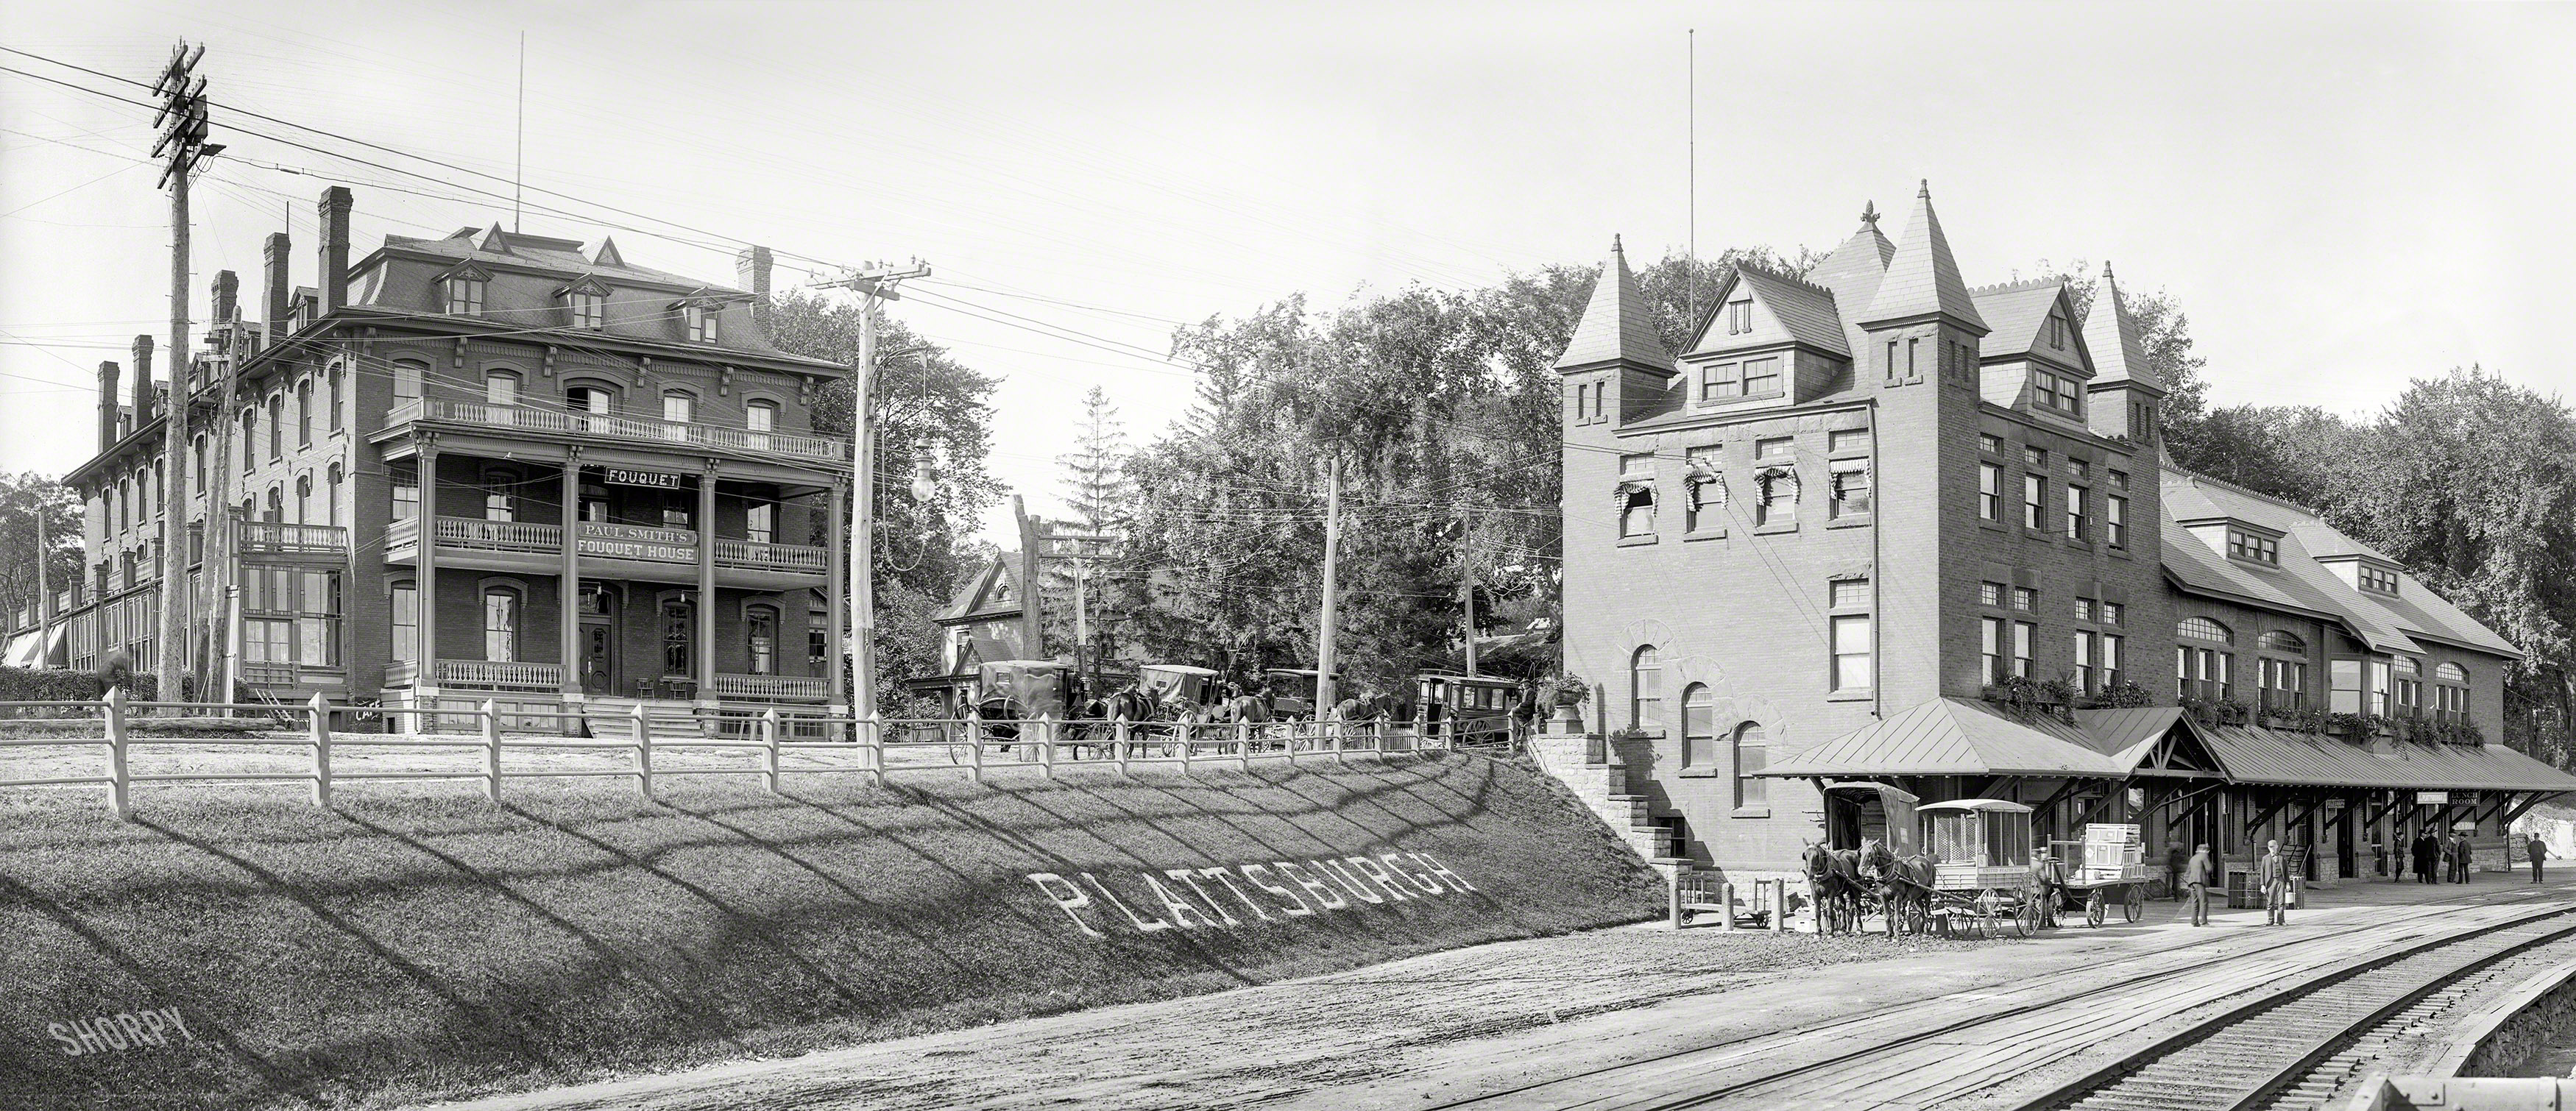 1904. "Fouquet House and Delaware & Hudson R.R. station, Plattsburgh, N.Y." Panorama made from two 8x10 inch glass negatives. View full size.